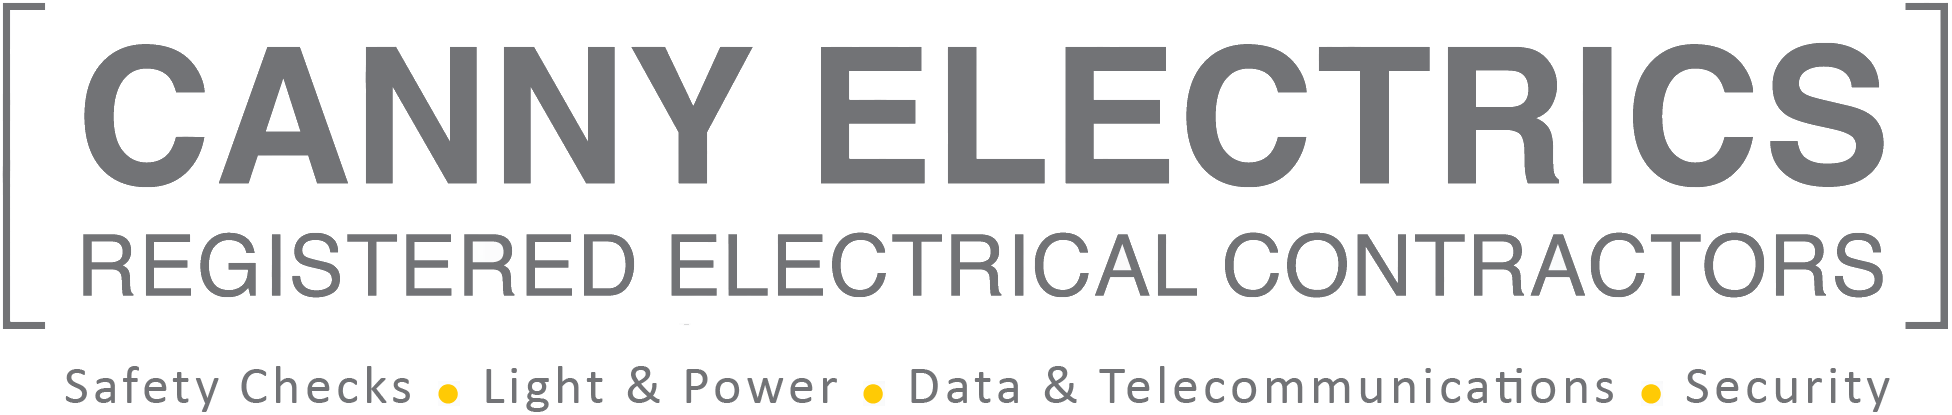 Canny Electrics | Reliable Electrician Melbourne